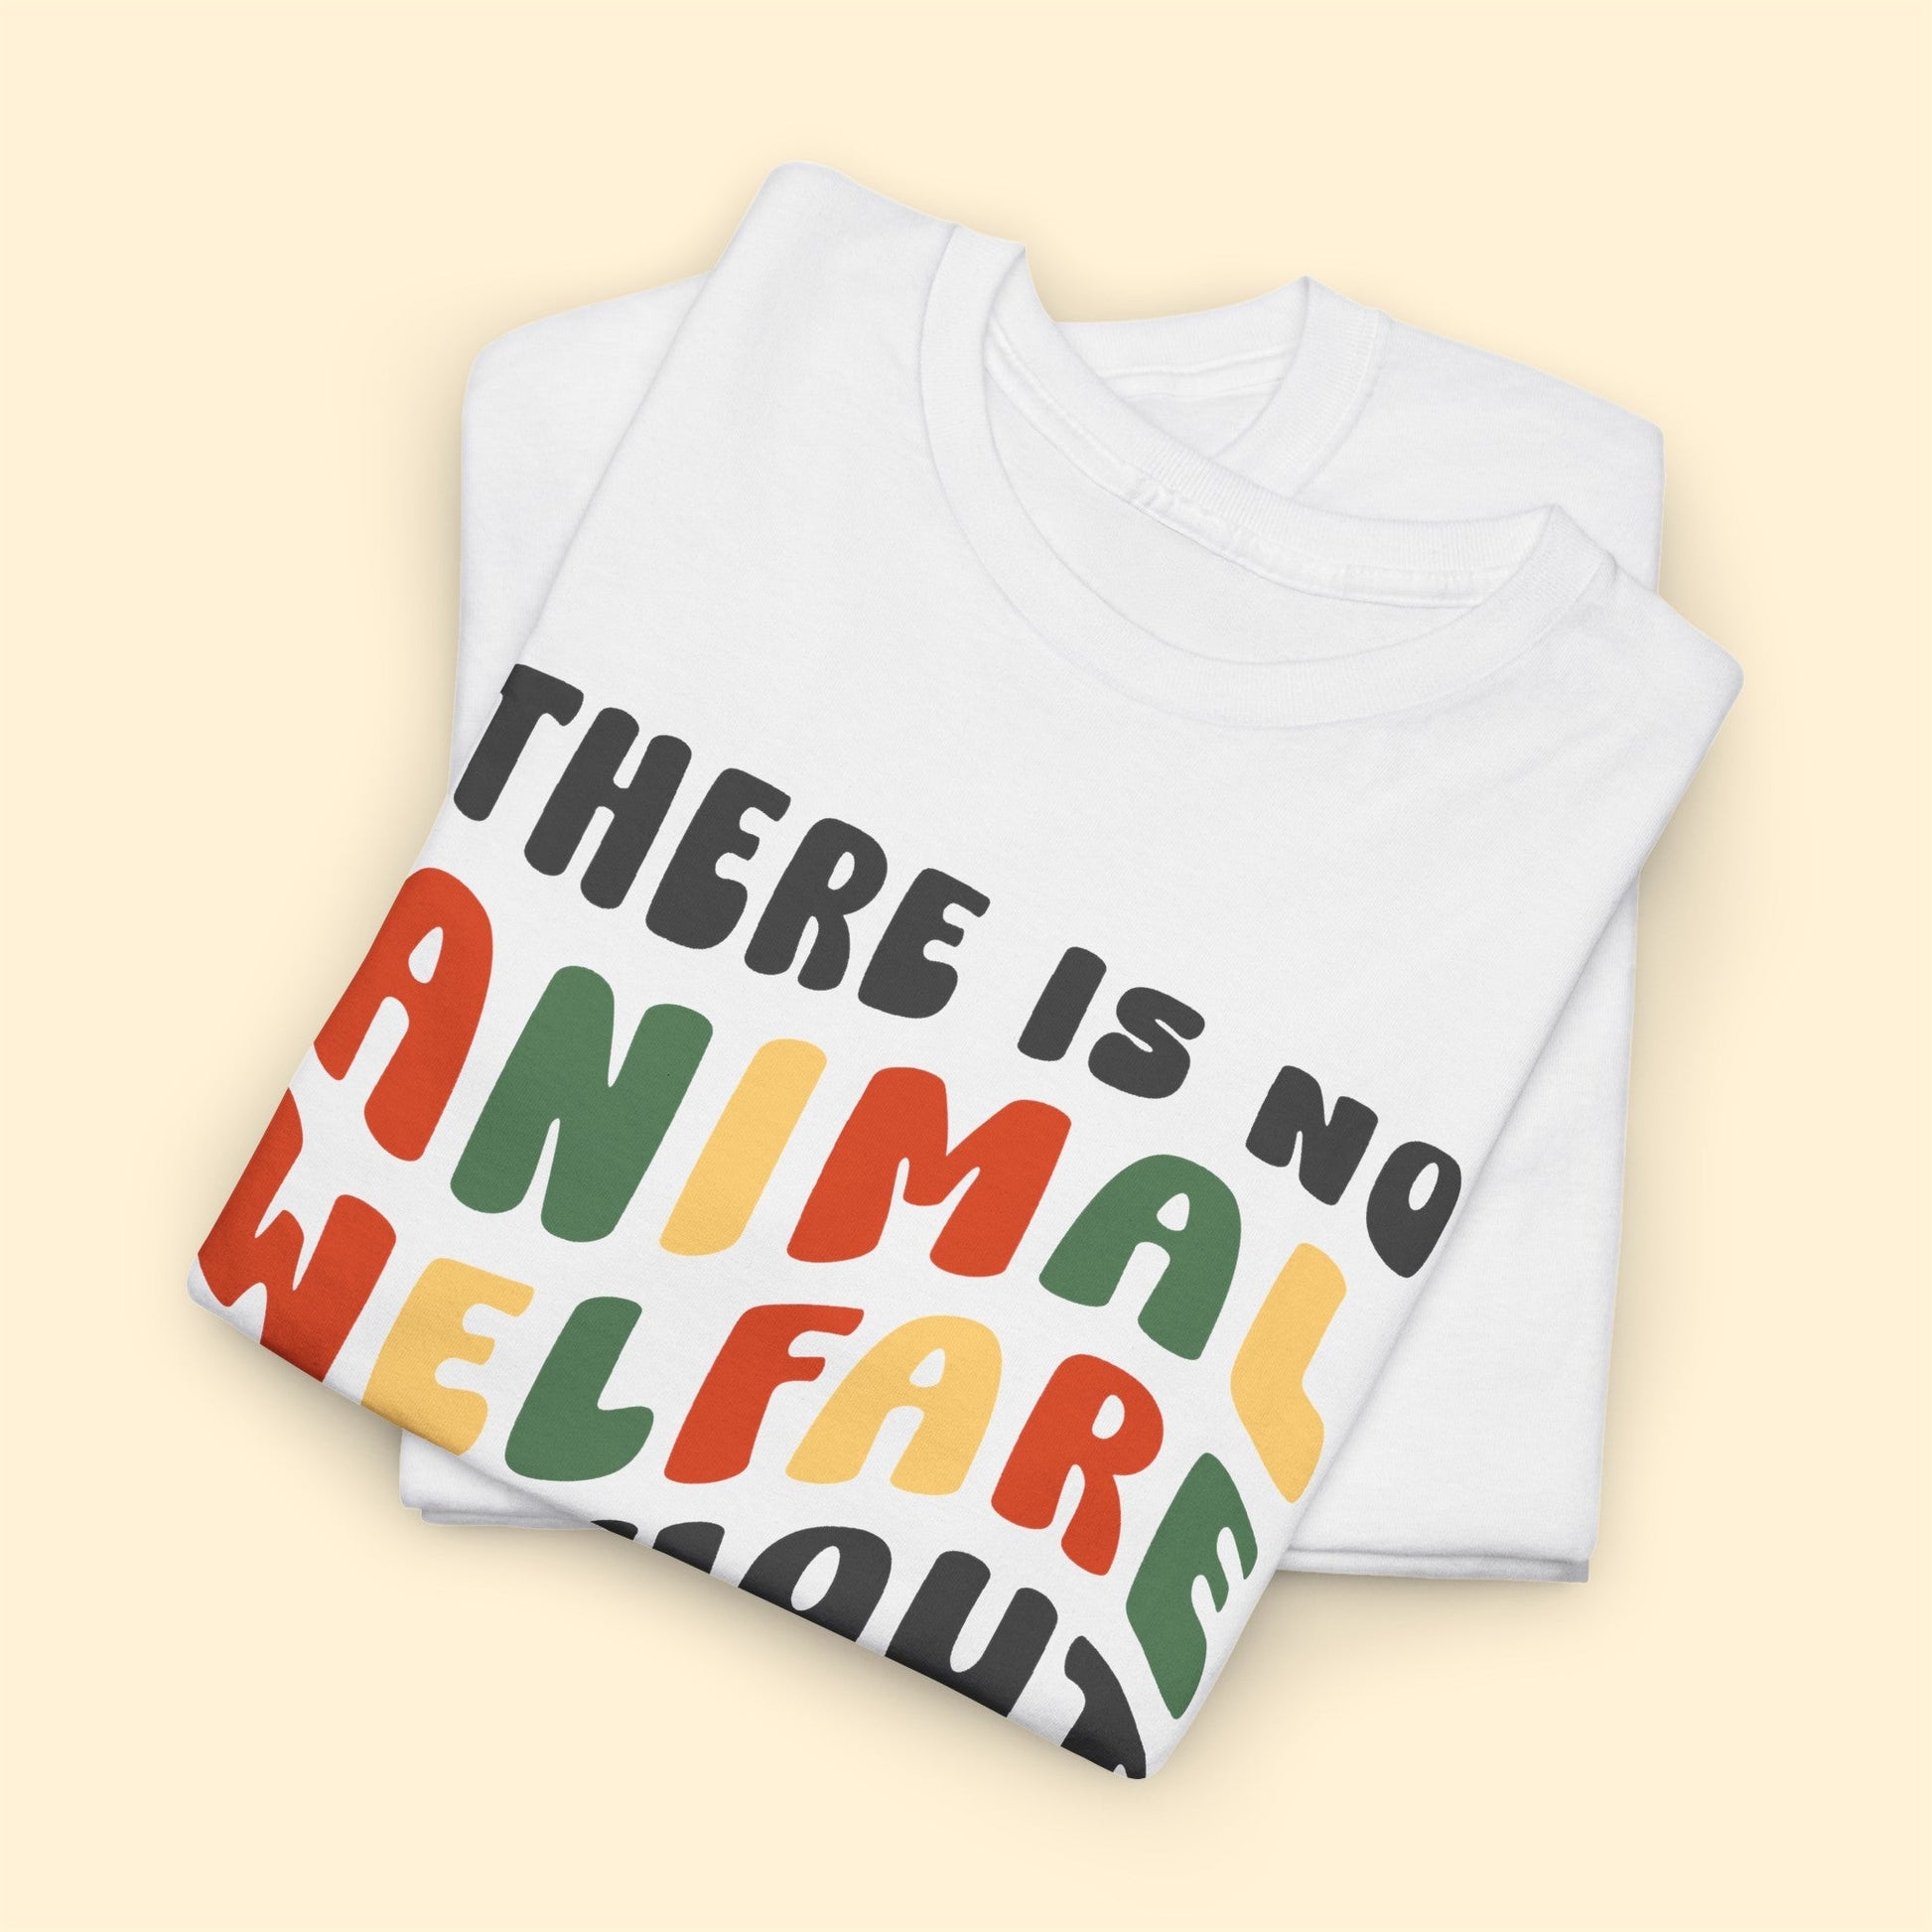 There Is No Animal Welfare Without Human Welfare | Retro Style | Unisex T-shirt - Detezi Designs-12173609818366905530